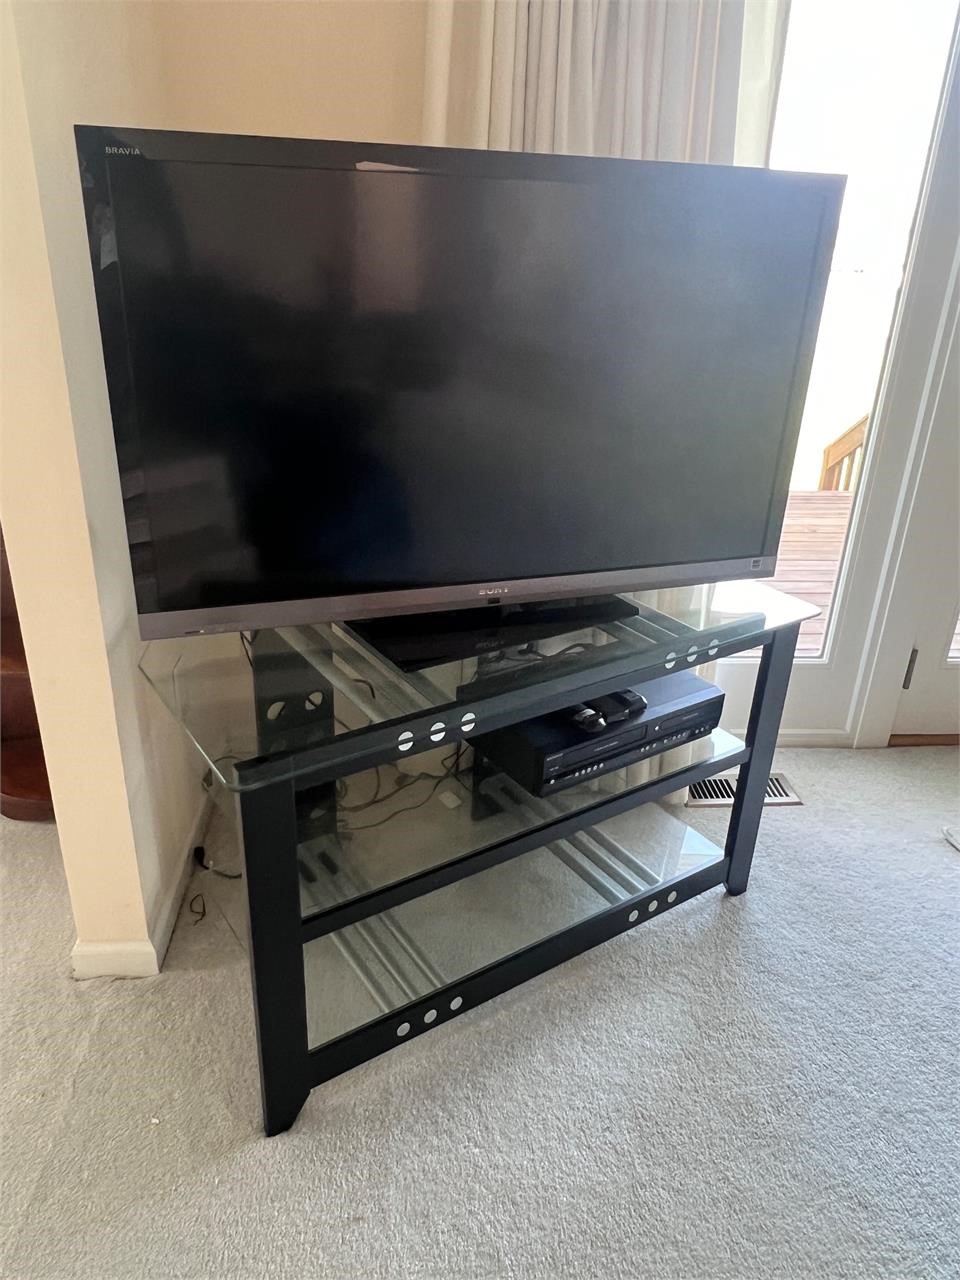 46” Sony television & tv stand & vcr vhs